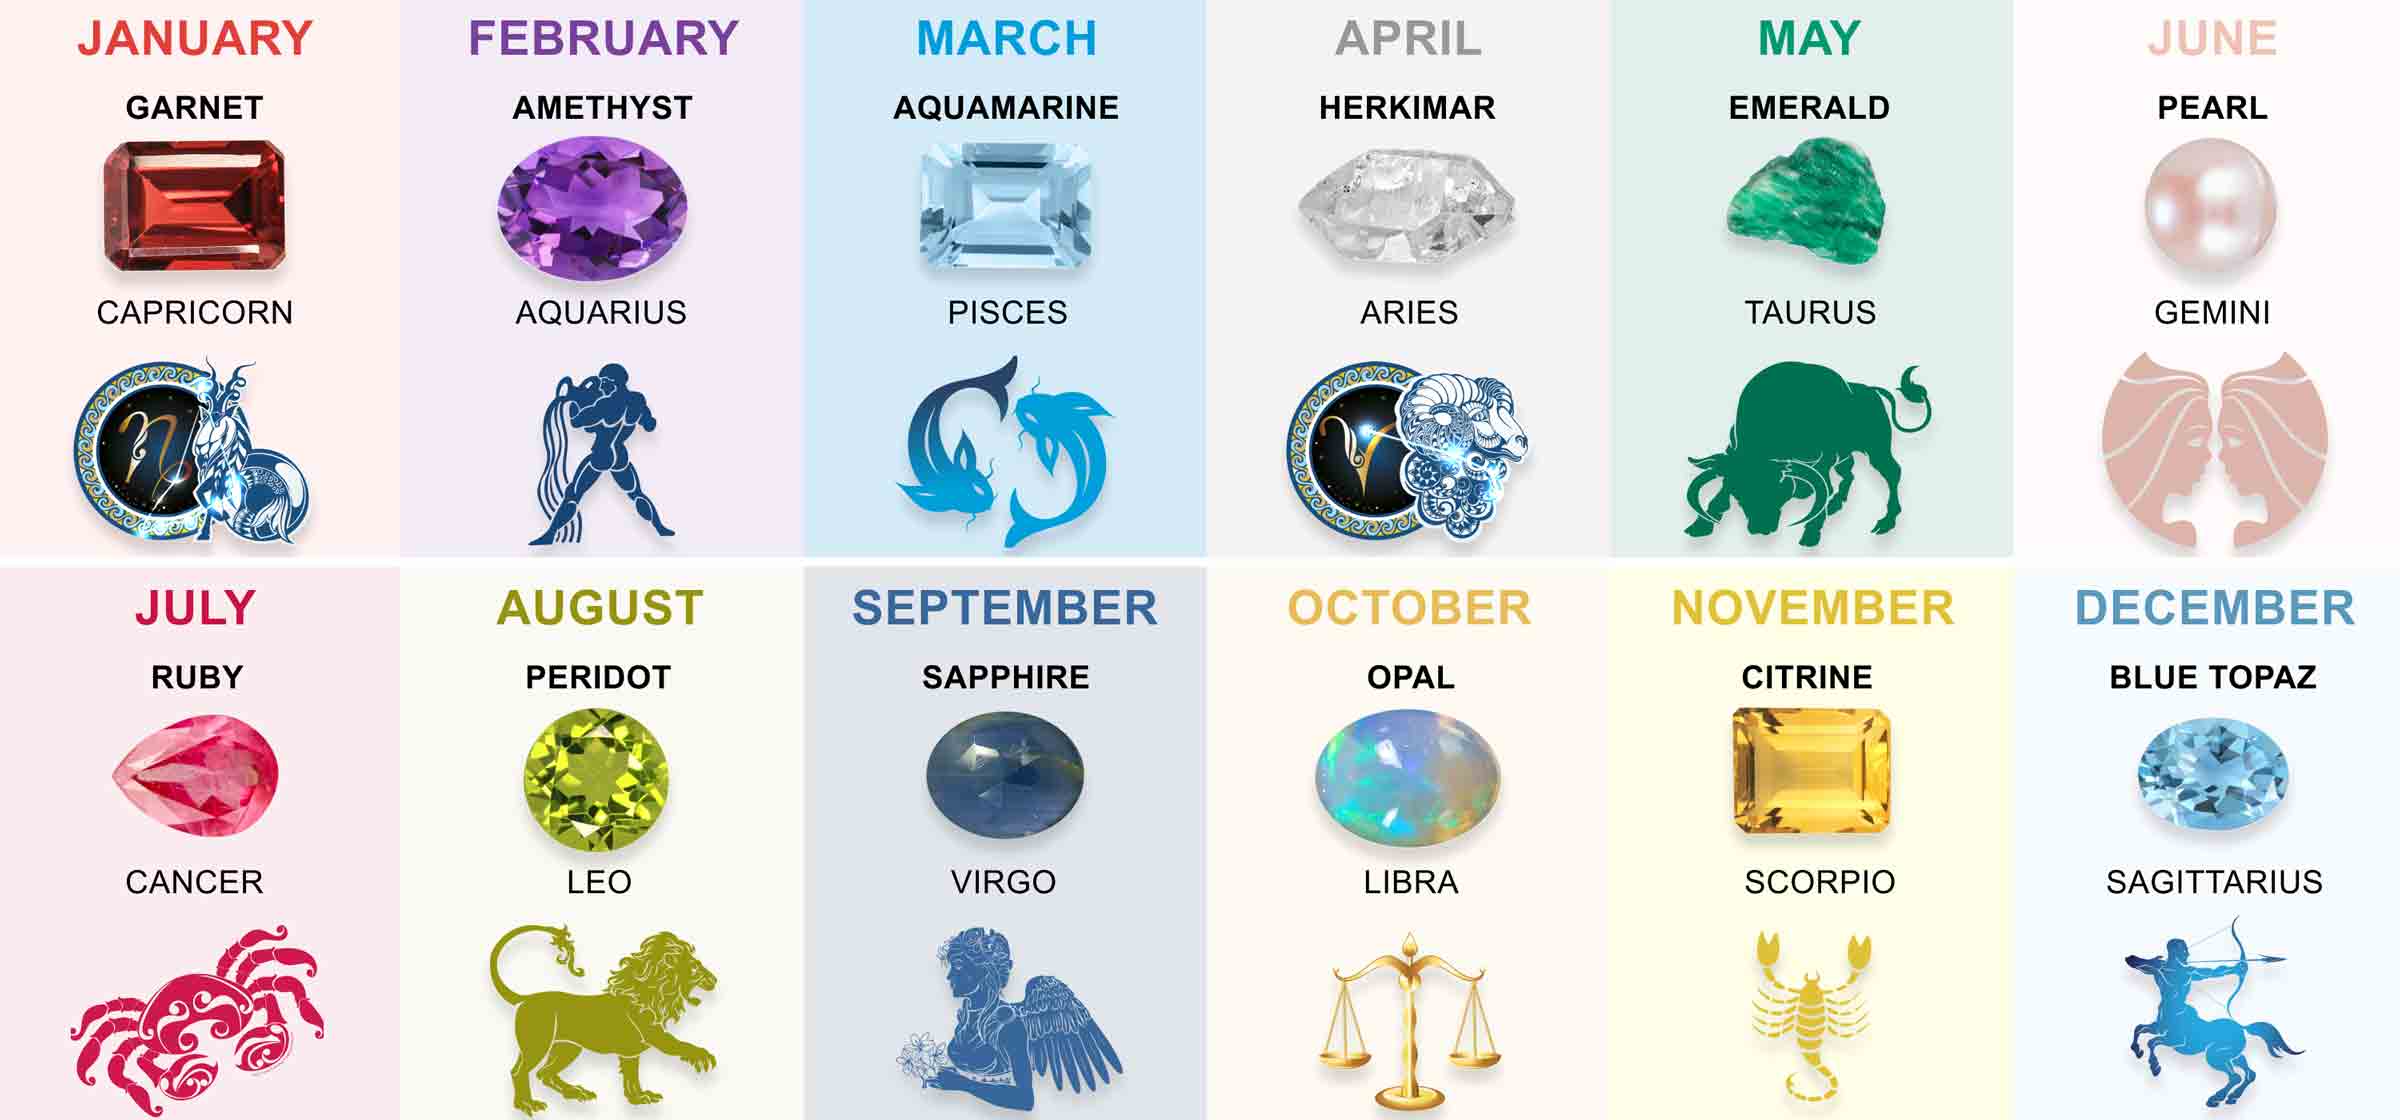 Know Your Zodiac 12 Gemstones For All Astrological Signs | vlr.eng.br